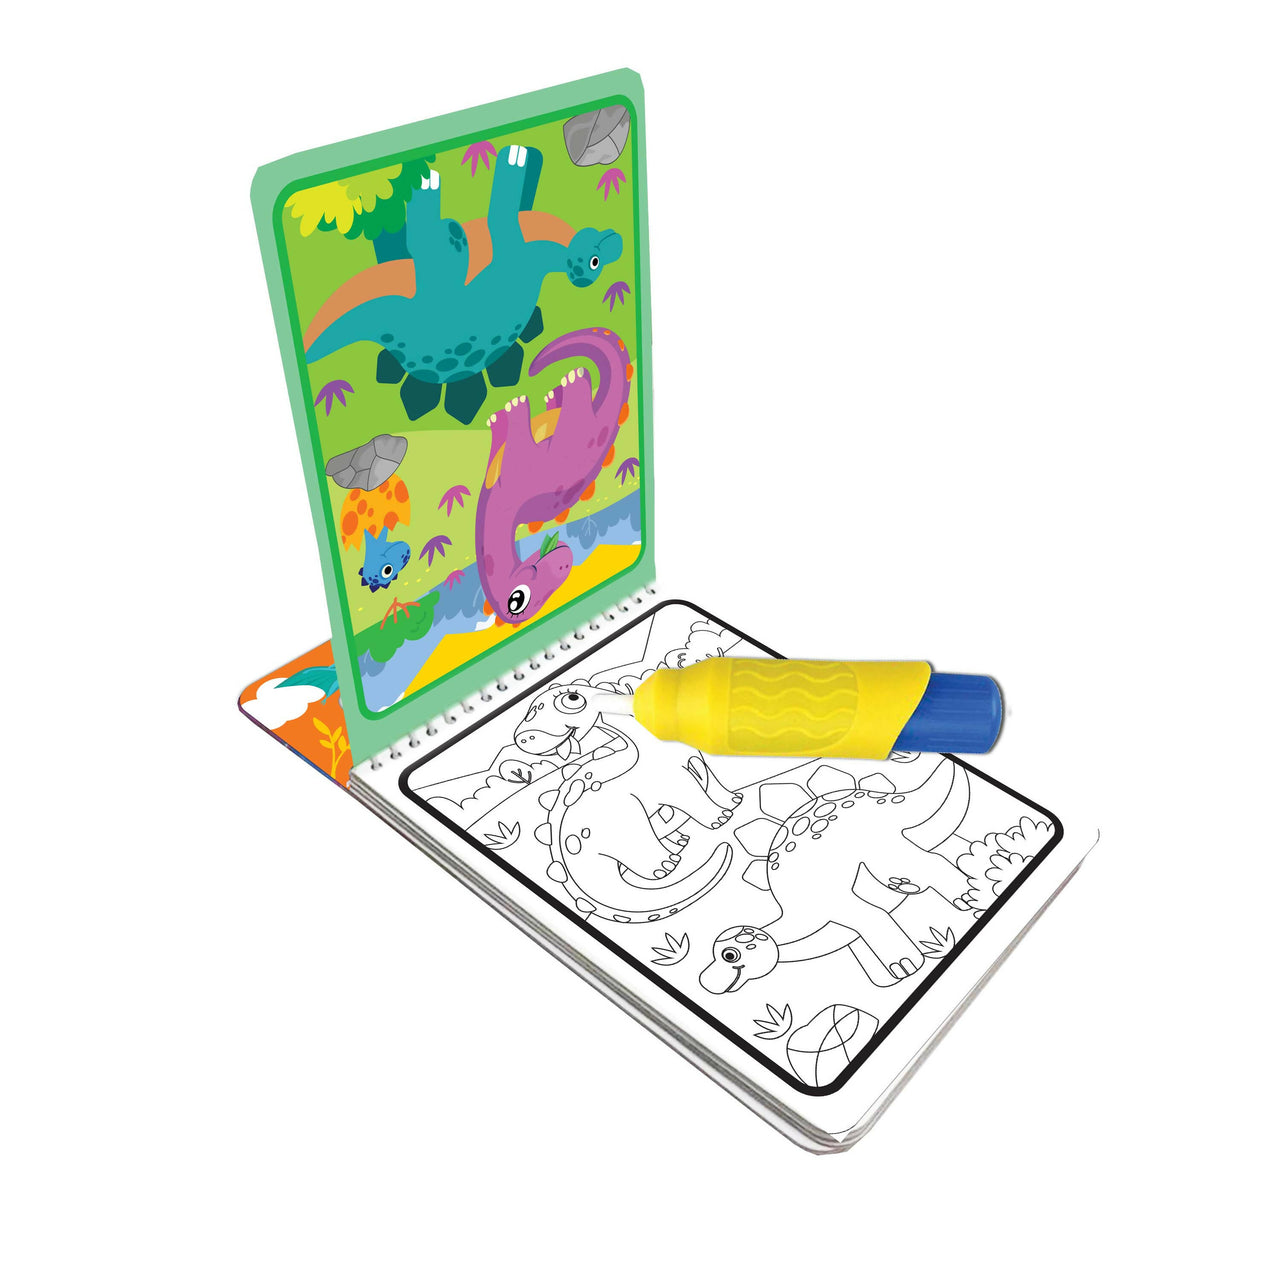 Dreamland Water Magic Dinosaur- With Water Pen - Use Over and Over Again : Children Drawing, Painting & Colouring Spiral Binding - Distacart